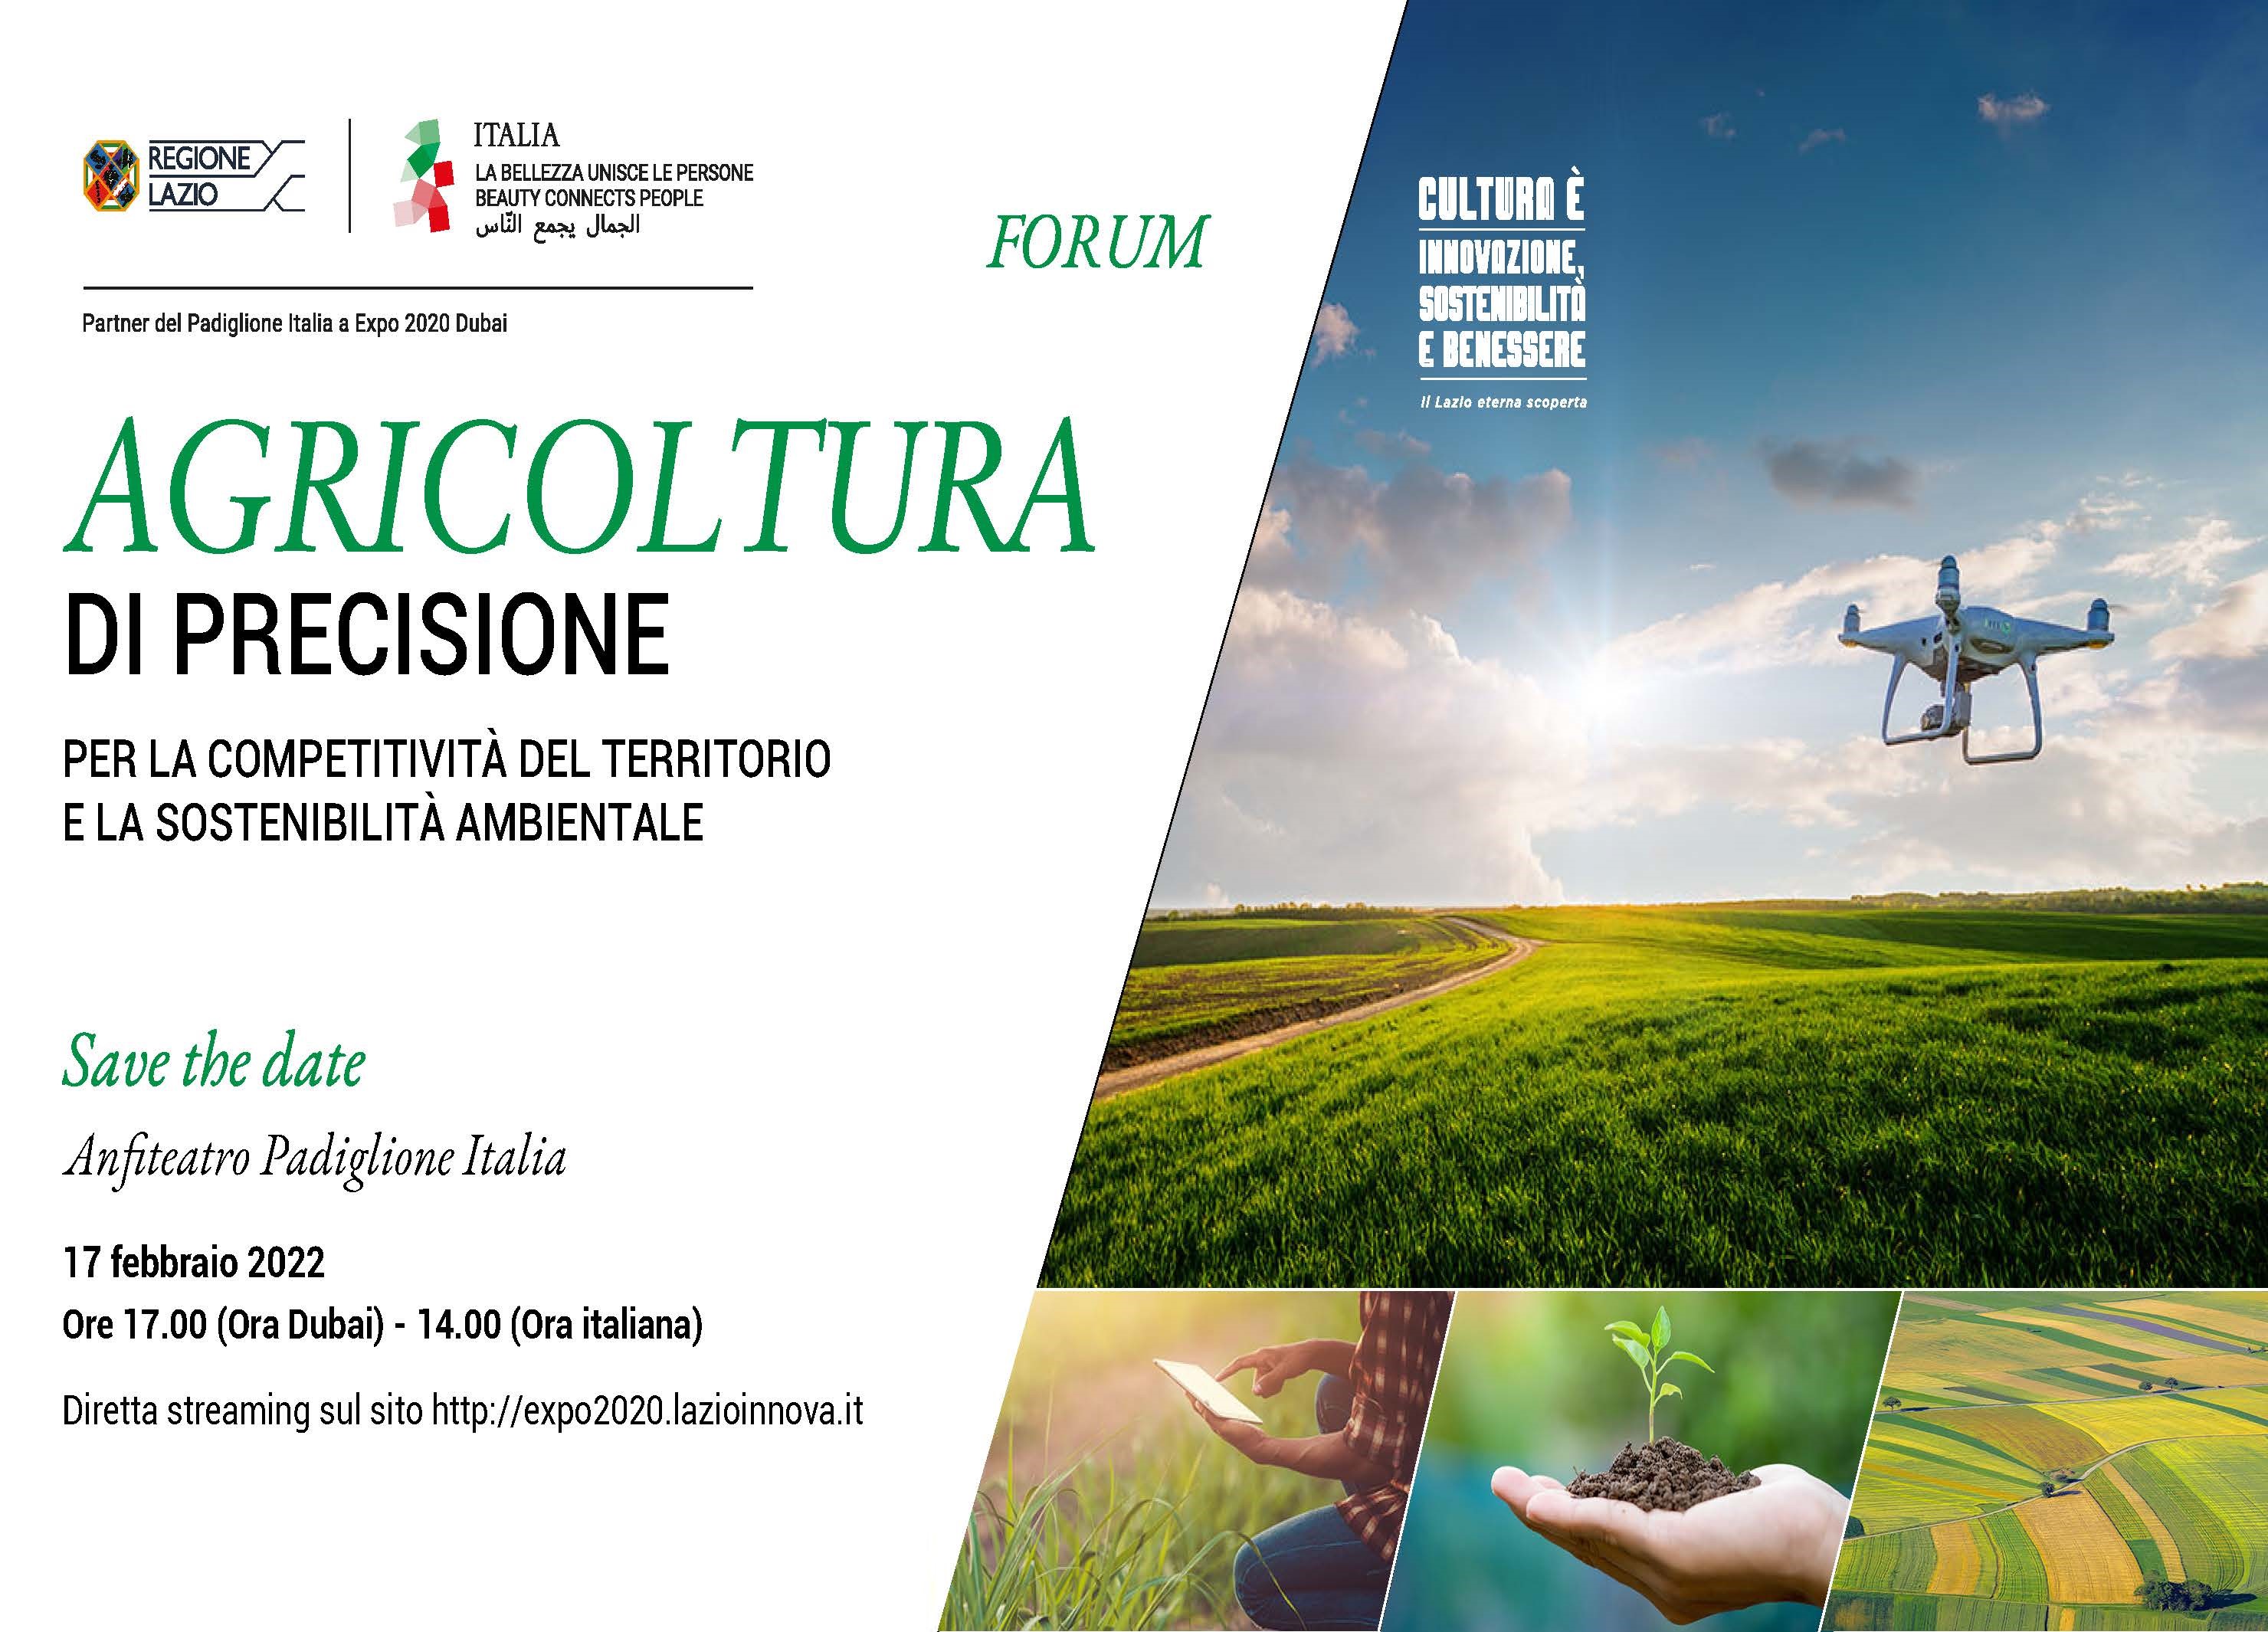 Precision Agricolture. For regional competitiveness and environmental sustainability